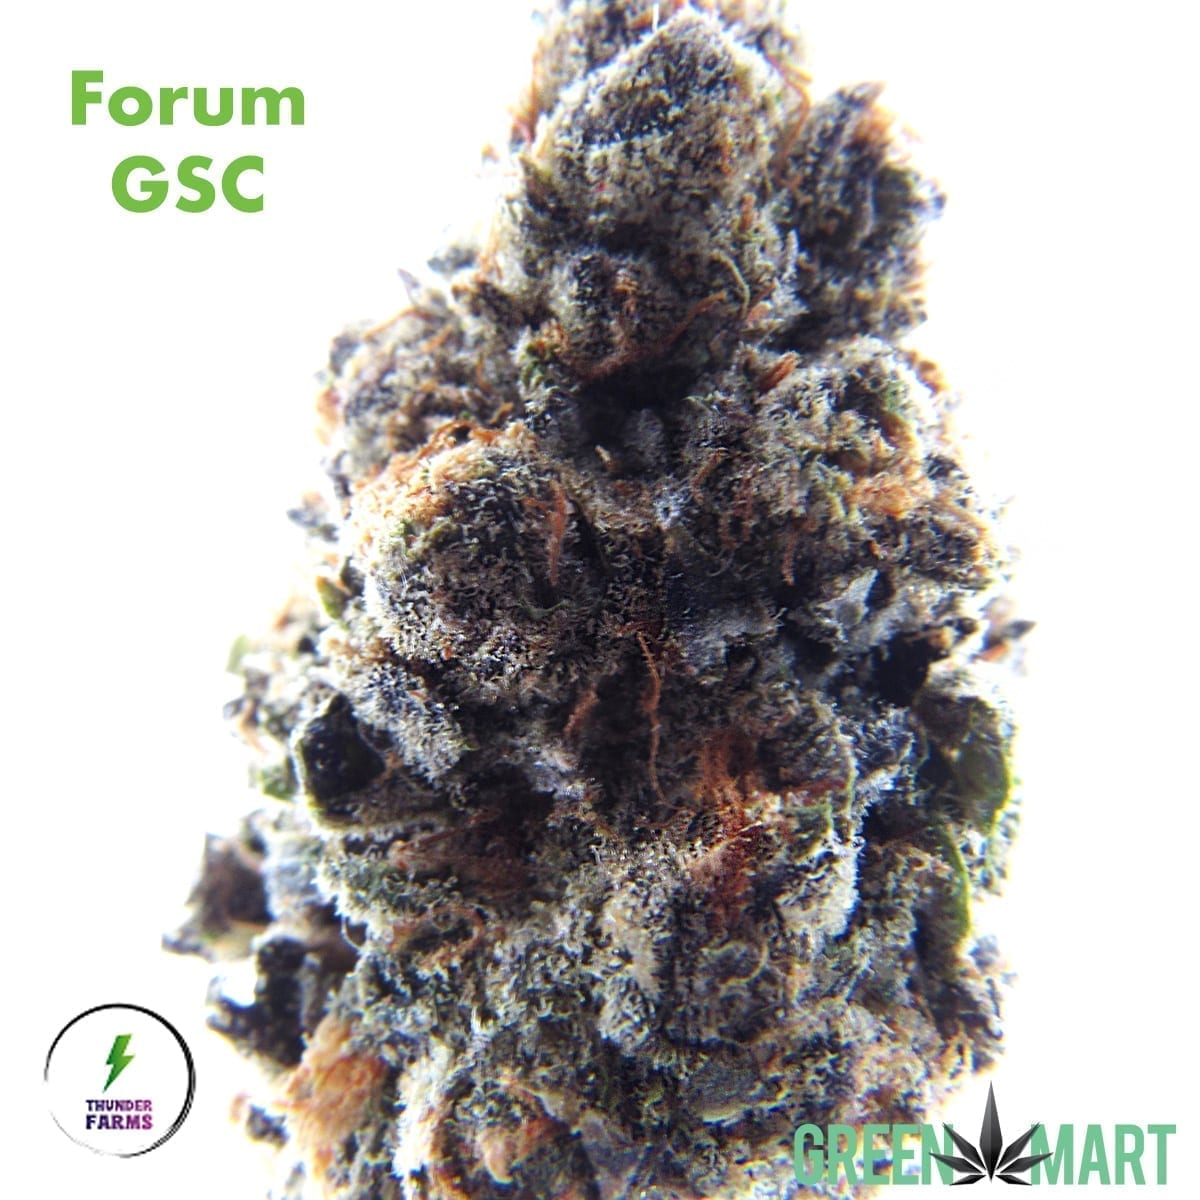 Forum GSC by Thunder Farms